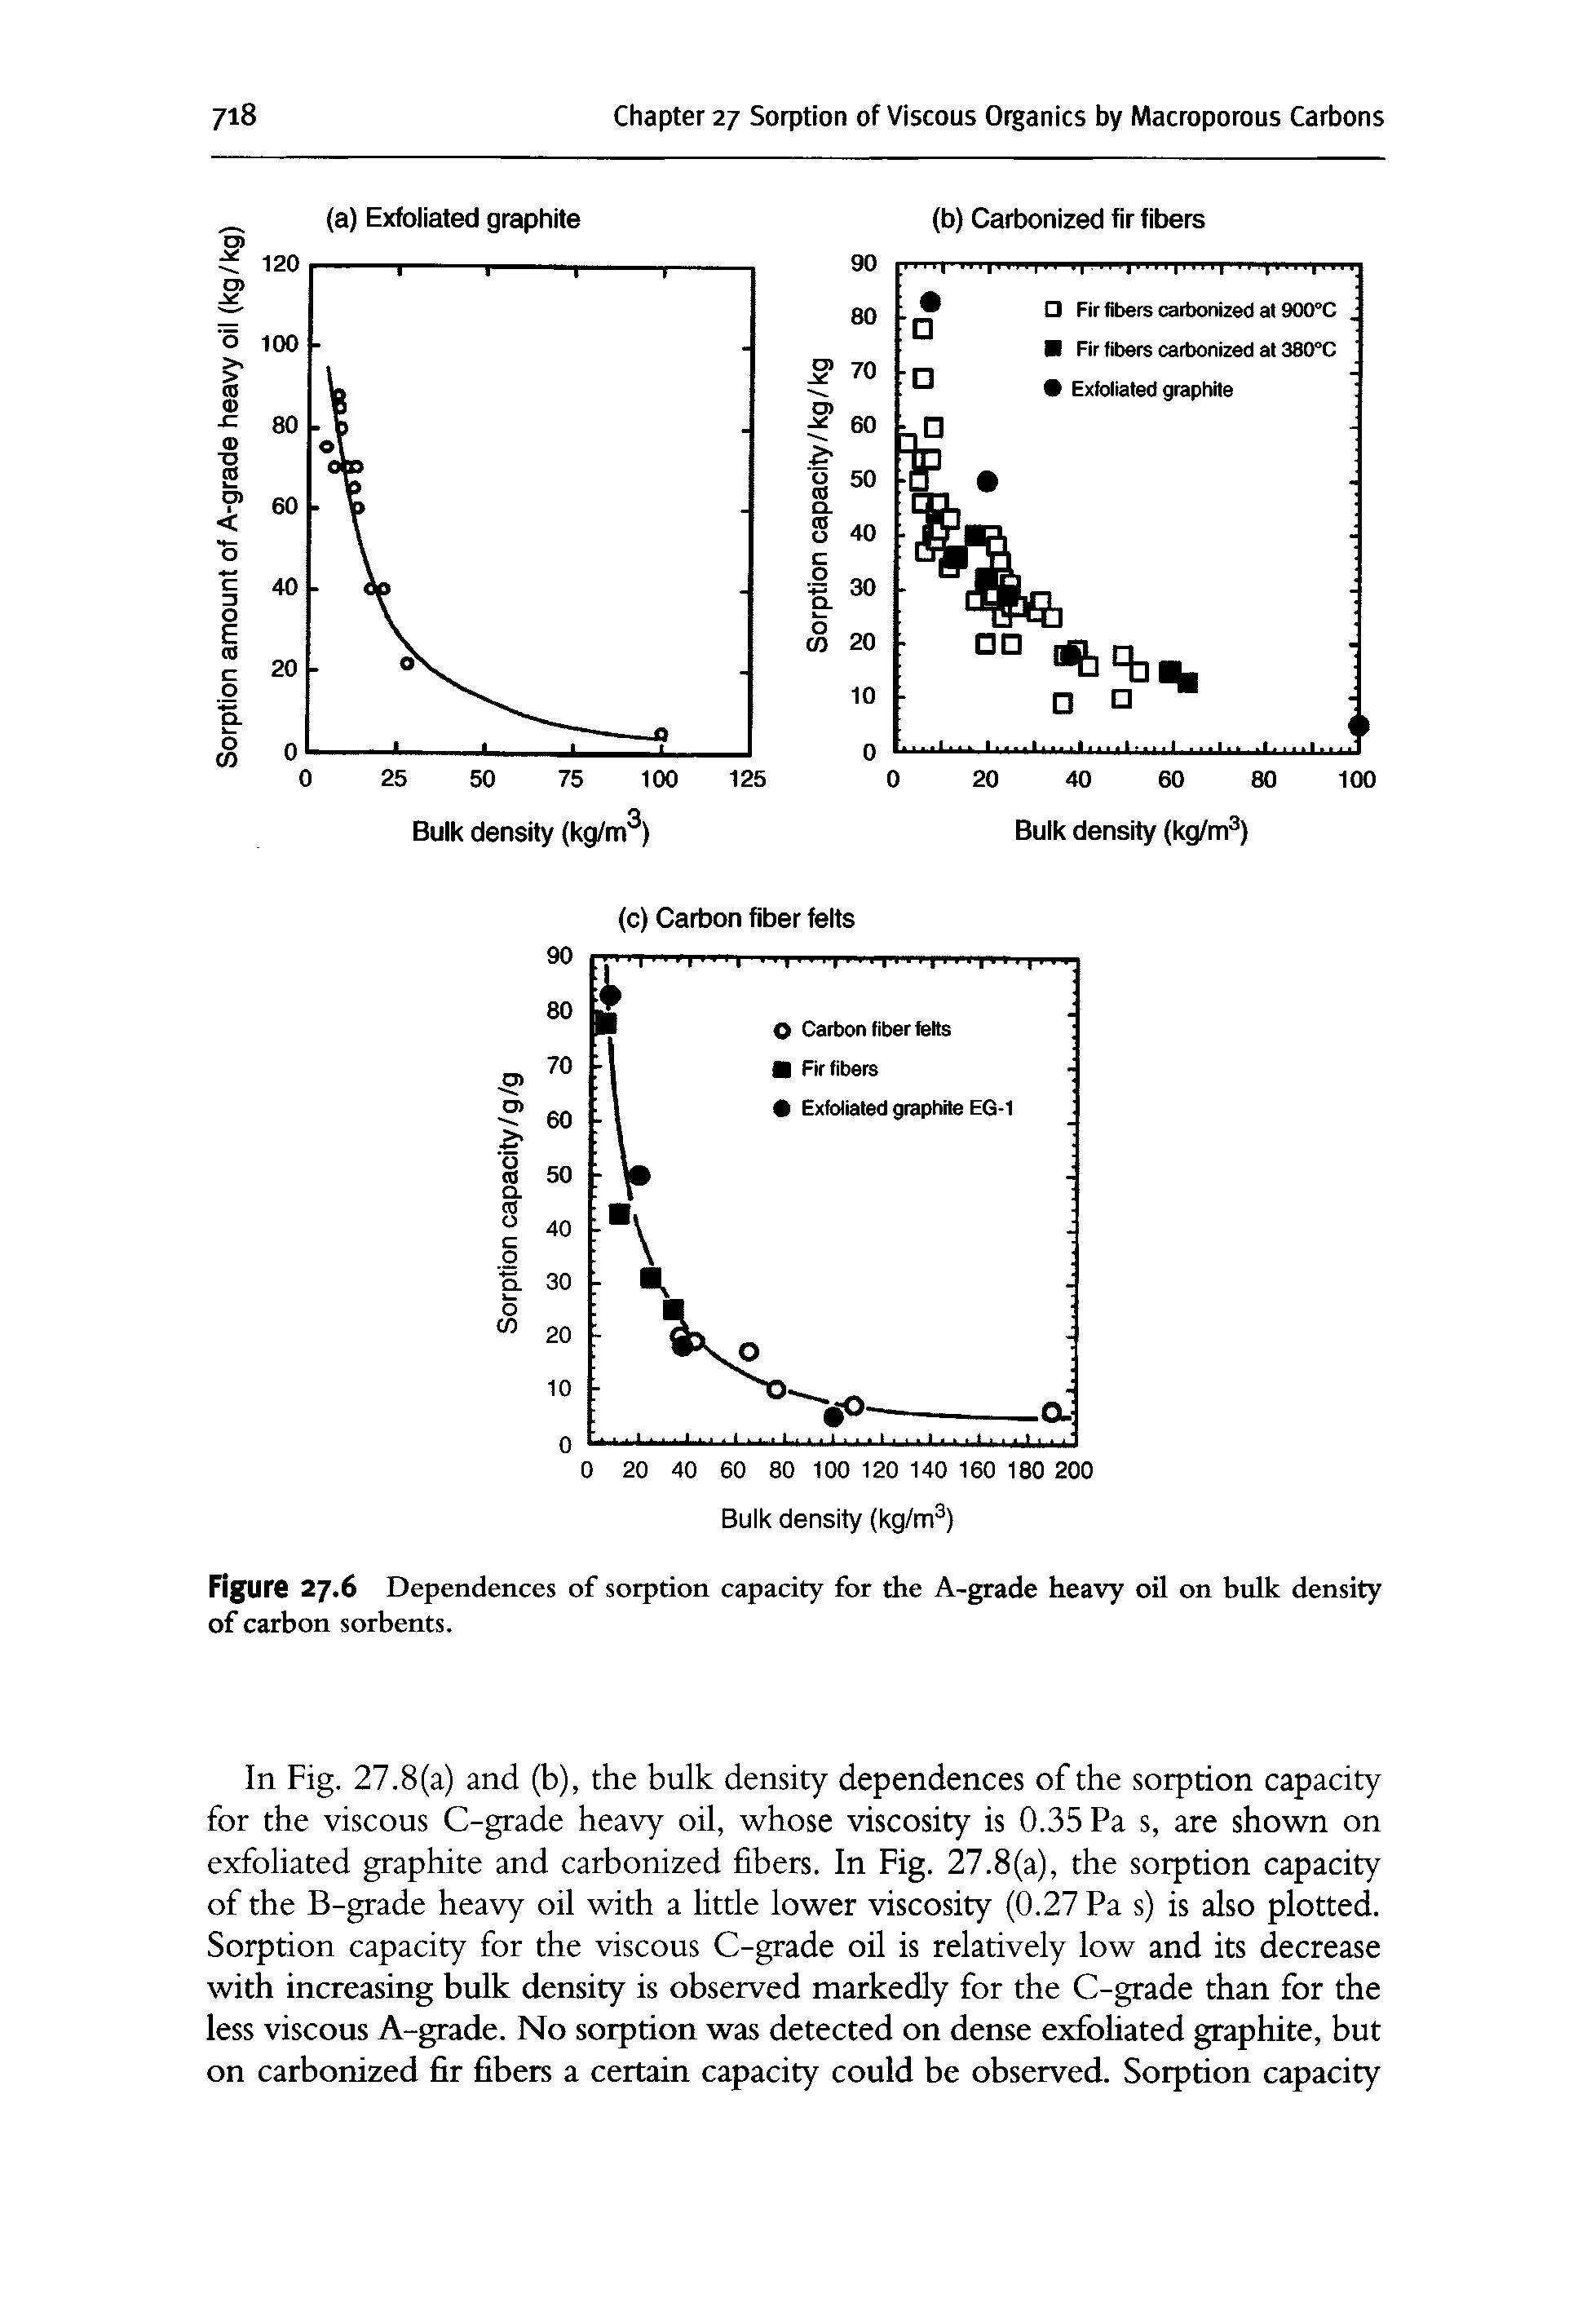 Figure 27.6 Dependences of sorption capacity for the A-grade heavy oil on hulk density of carbon sorbents.